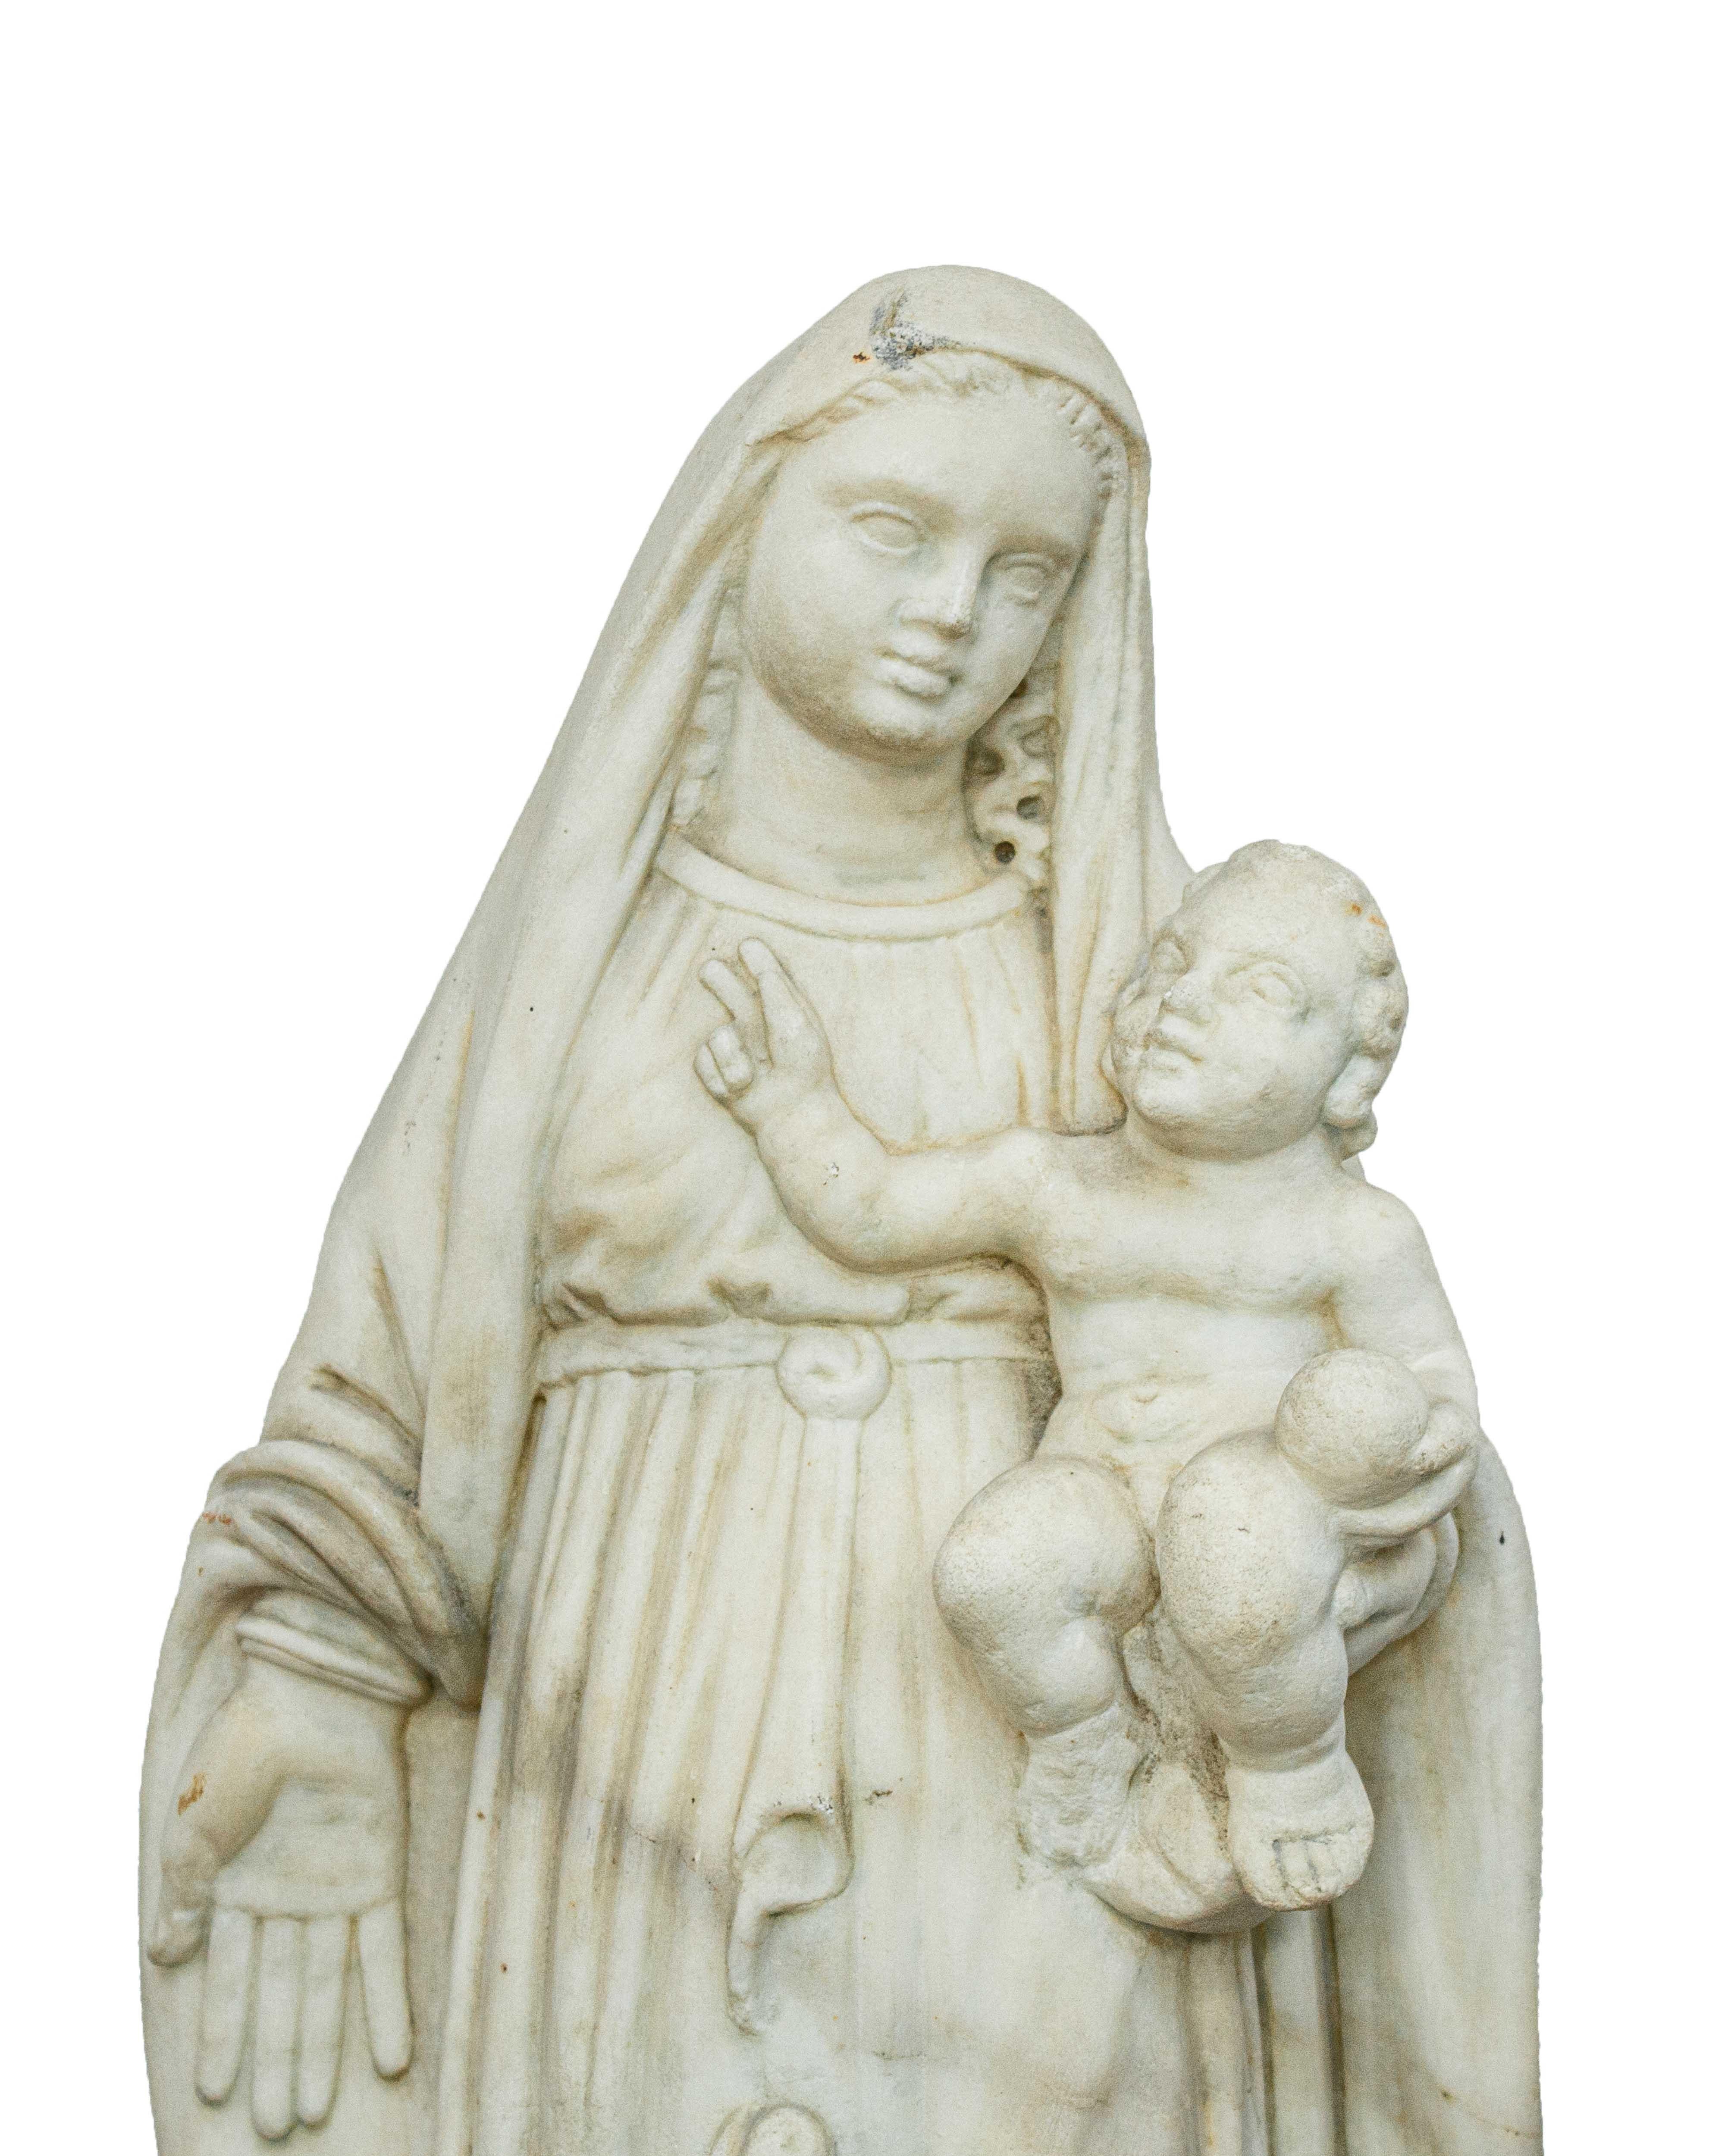 Ligurian school, 18th century

Madonna and Child and St. John

Marble, cm h. 43 - Base, cm 16 x 8

The sculpture under consideration, depicting a Madonna and Child with St. John at her feet, represents a marble artifact referable to the 18th-century